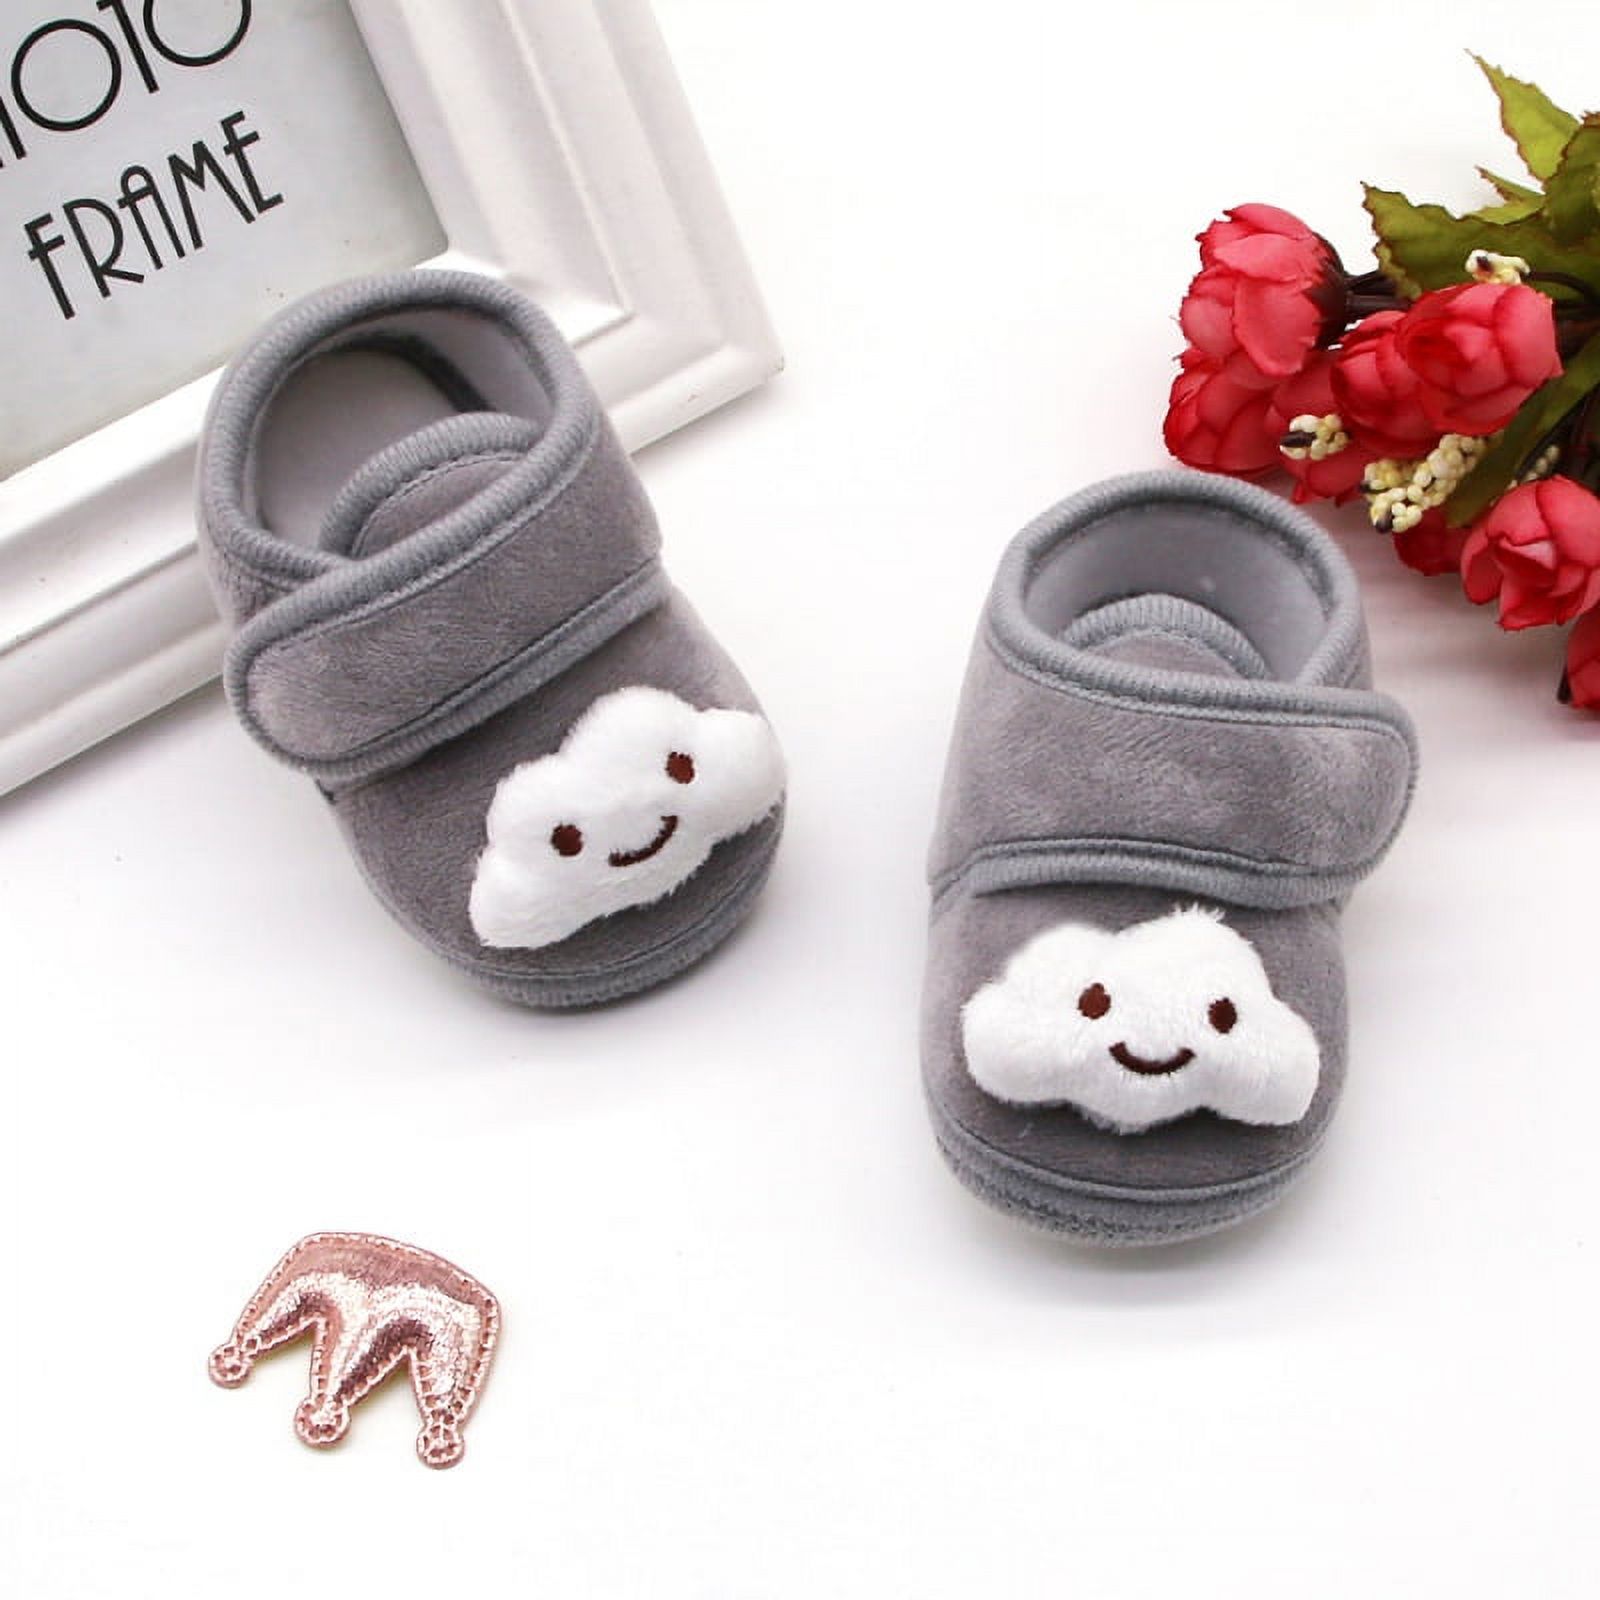 Infant Baby Boys Girls Slipper Soft Sole Non Skid Sneaker Moccasins Toddler First Walker Crib House Shoes - image 3 of 7